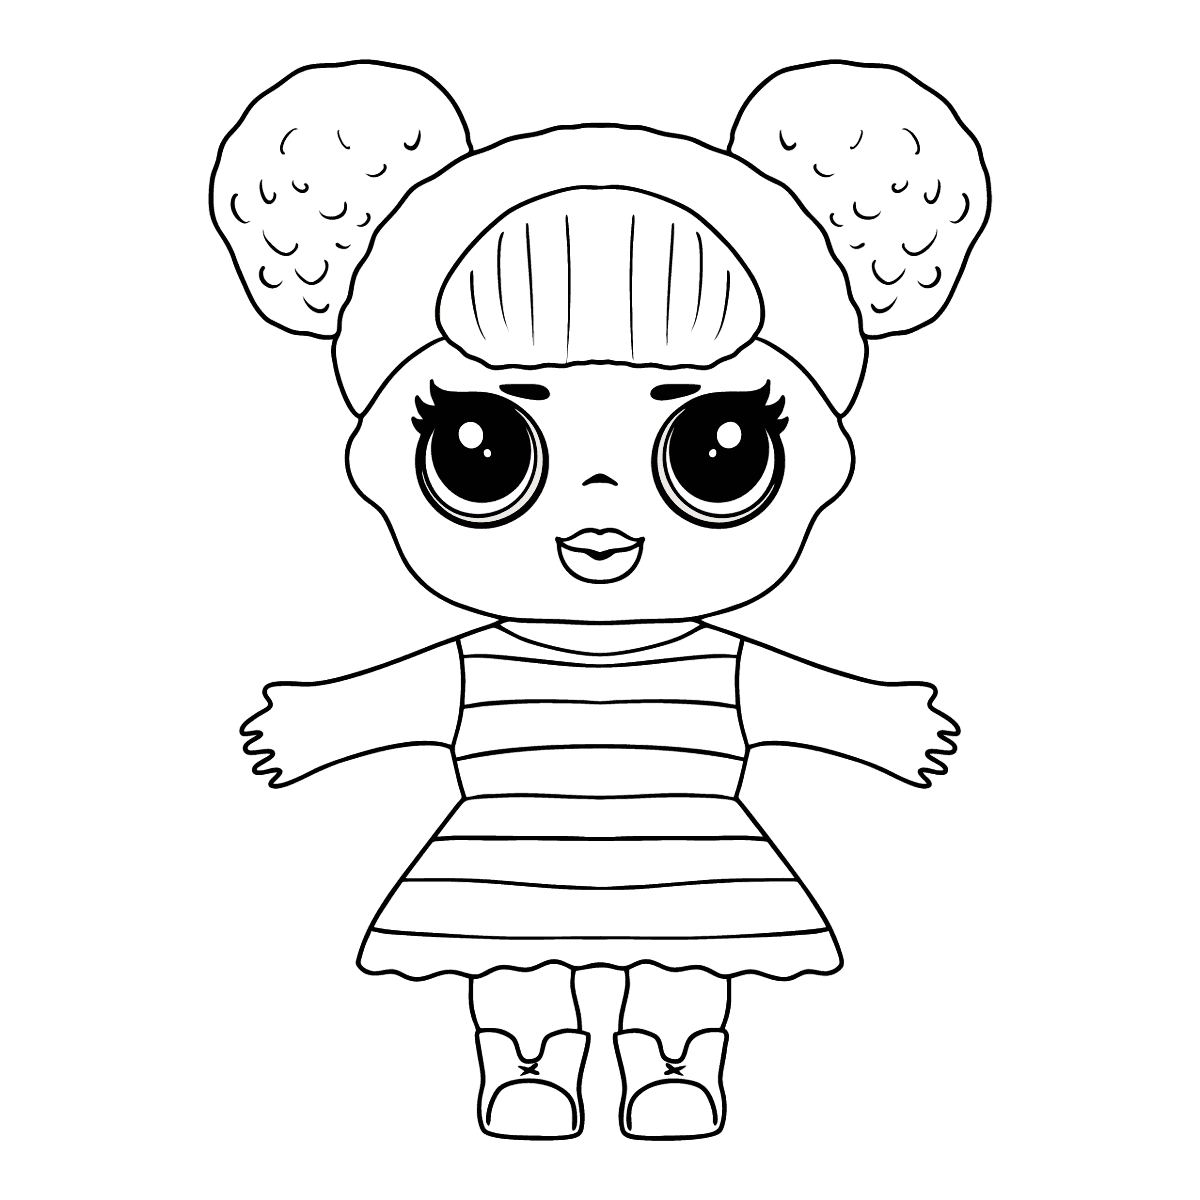 L.O.L. Surprise Doll Queen Bee - Coloring Pages for Kids